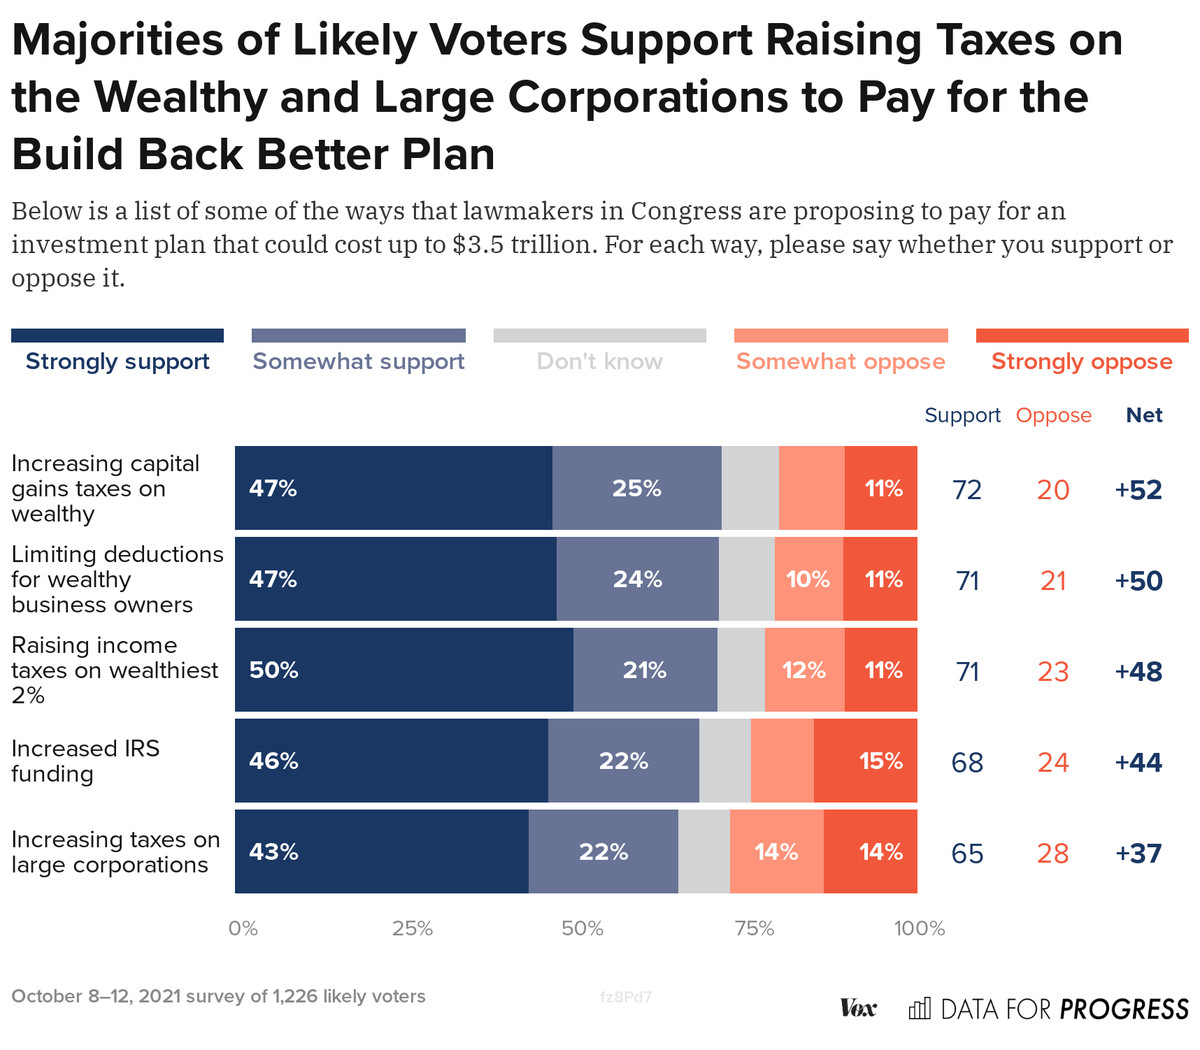 Chart: “Majorities of likely voters support raising taxes on the wealthy and large corporations to pay for the Build Back Better Plan”